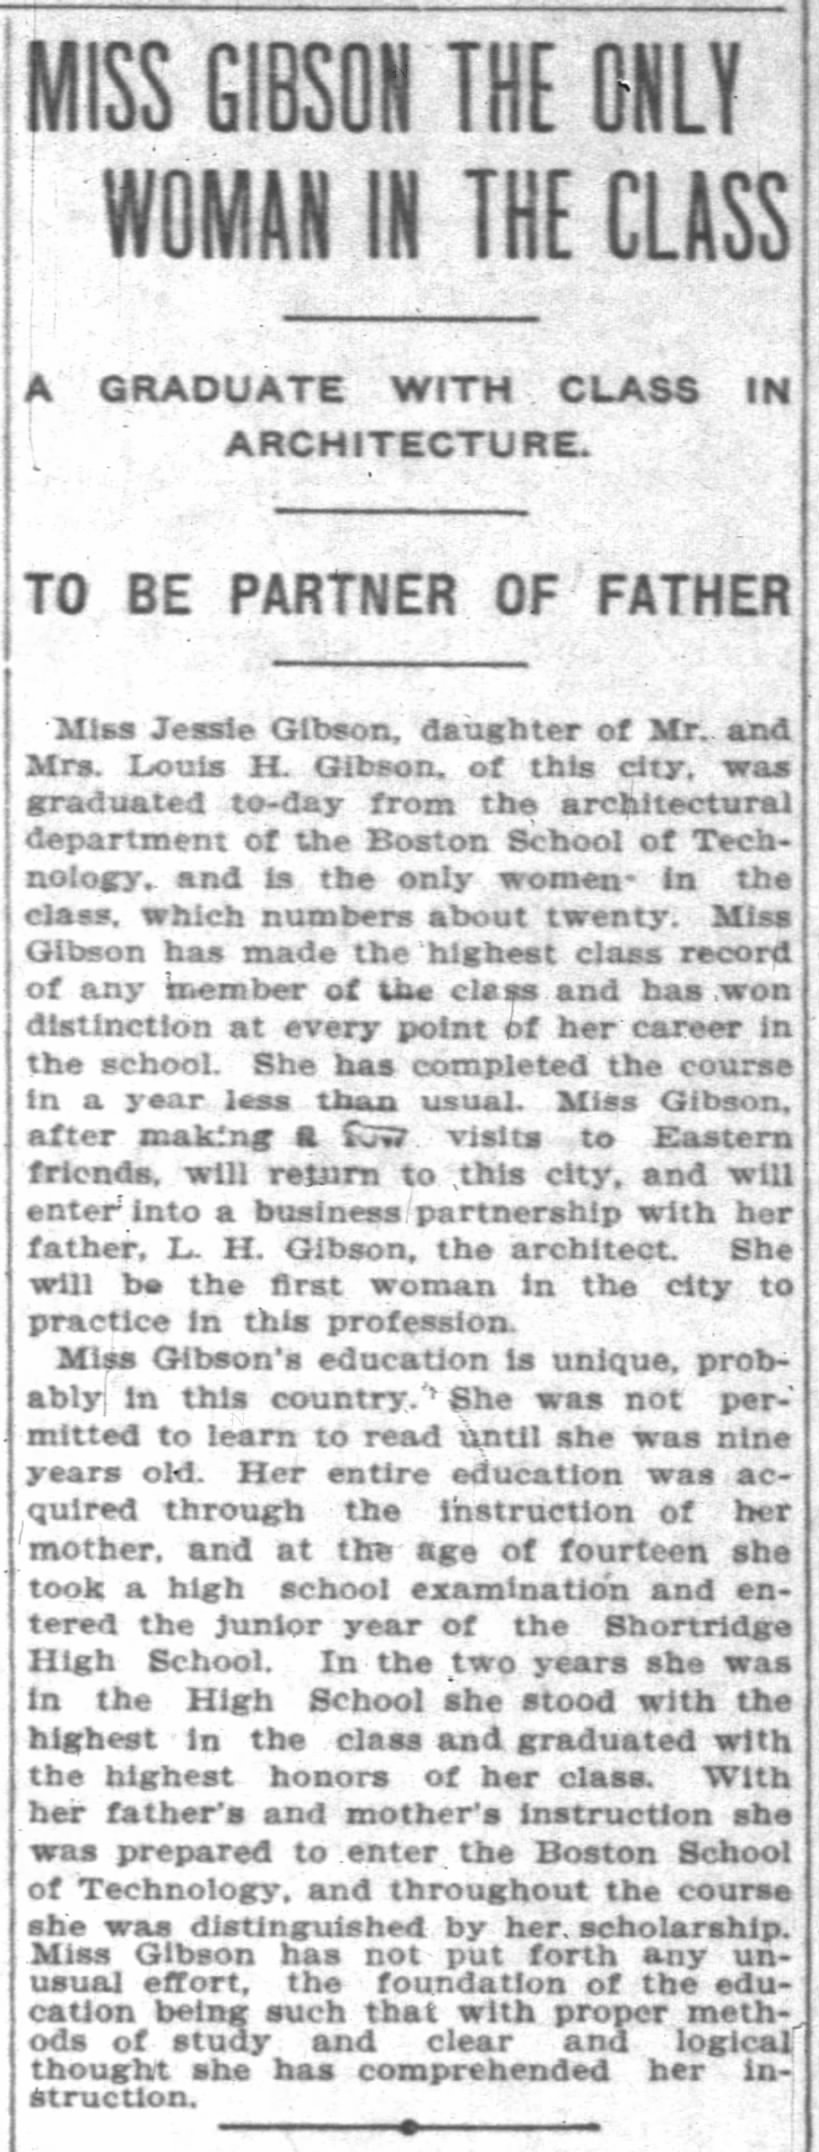 Jessie Gibson to be partner of father. Indianapolis News, June 9, 1903, pg. 7